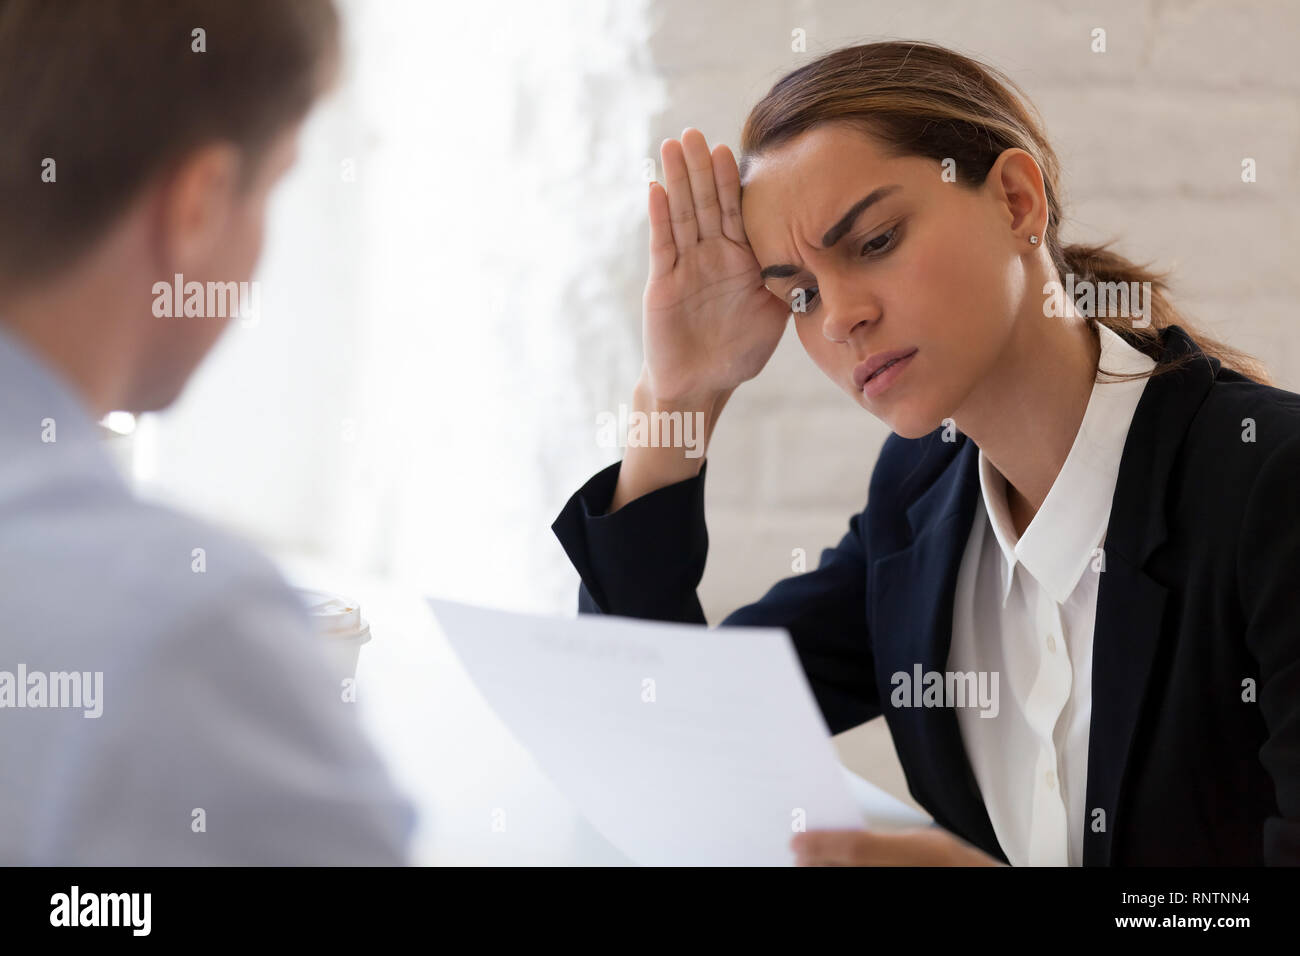 Confused hr manager interviewing unsuitable job candidate Stock Photo